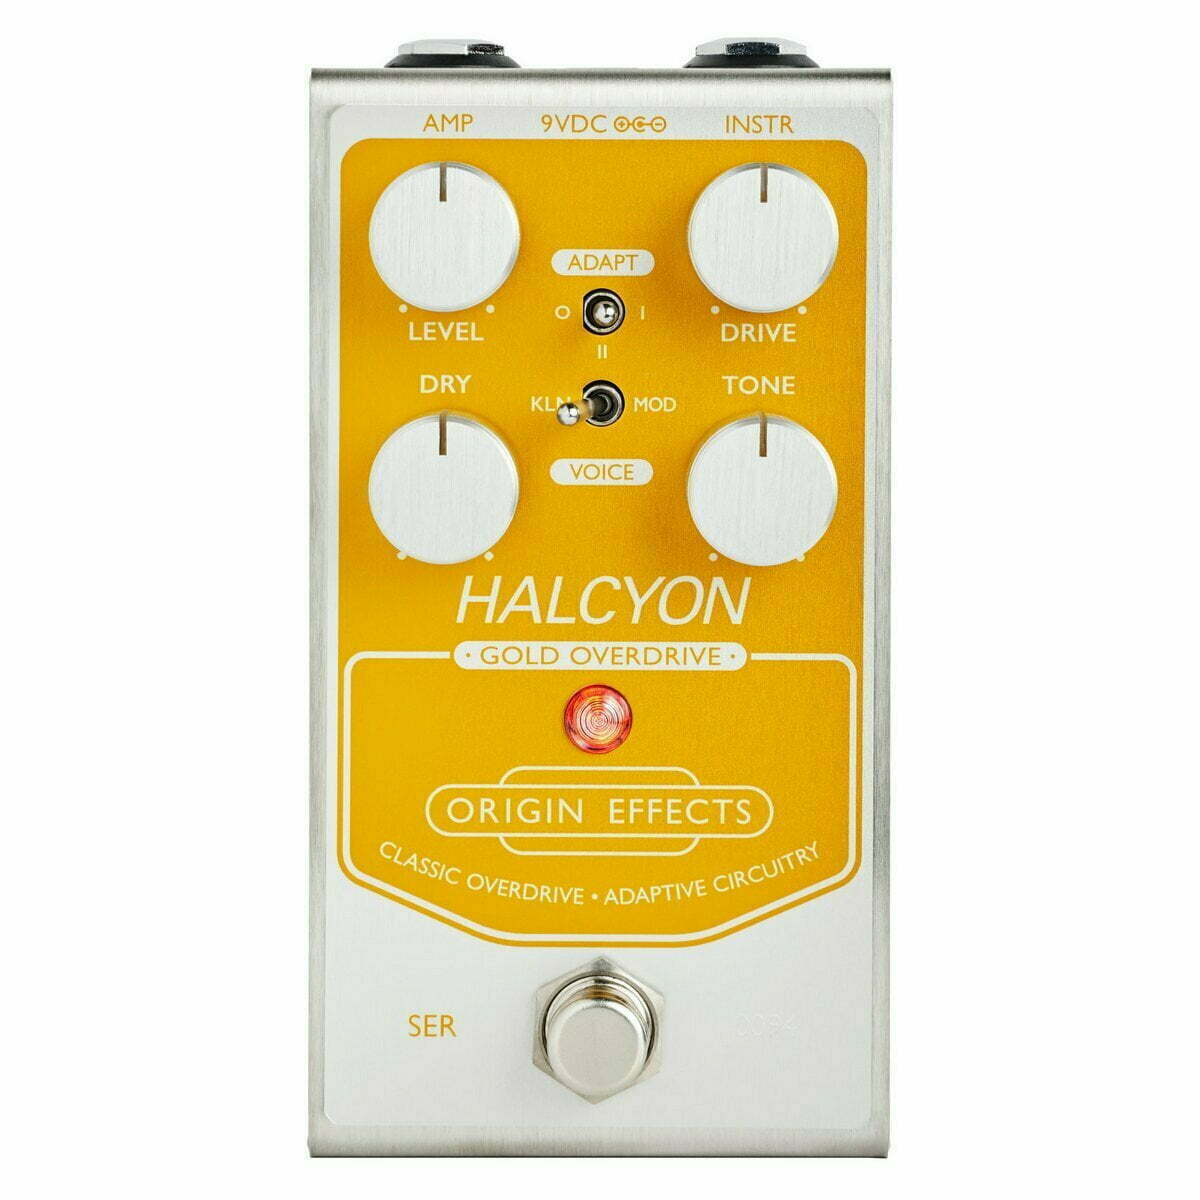 Origin Effects Halcyon Gold Overdrive Front (web) On